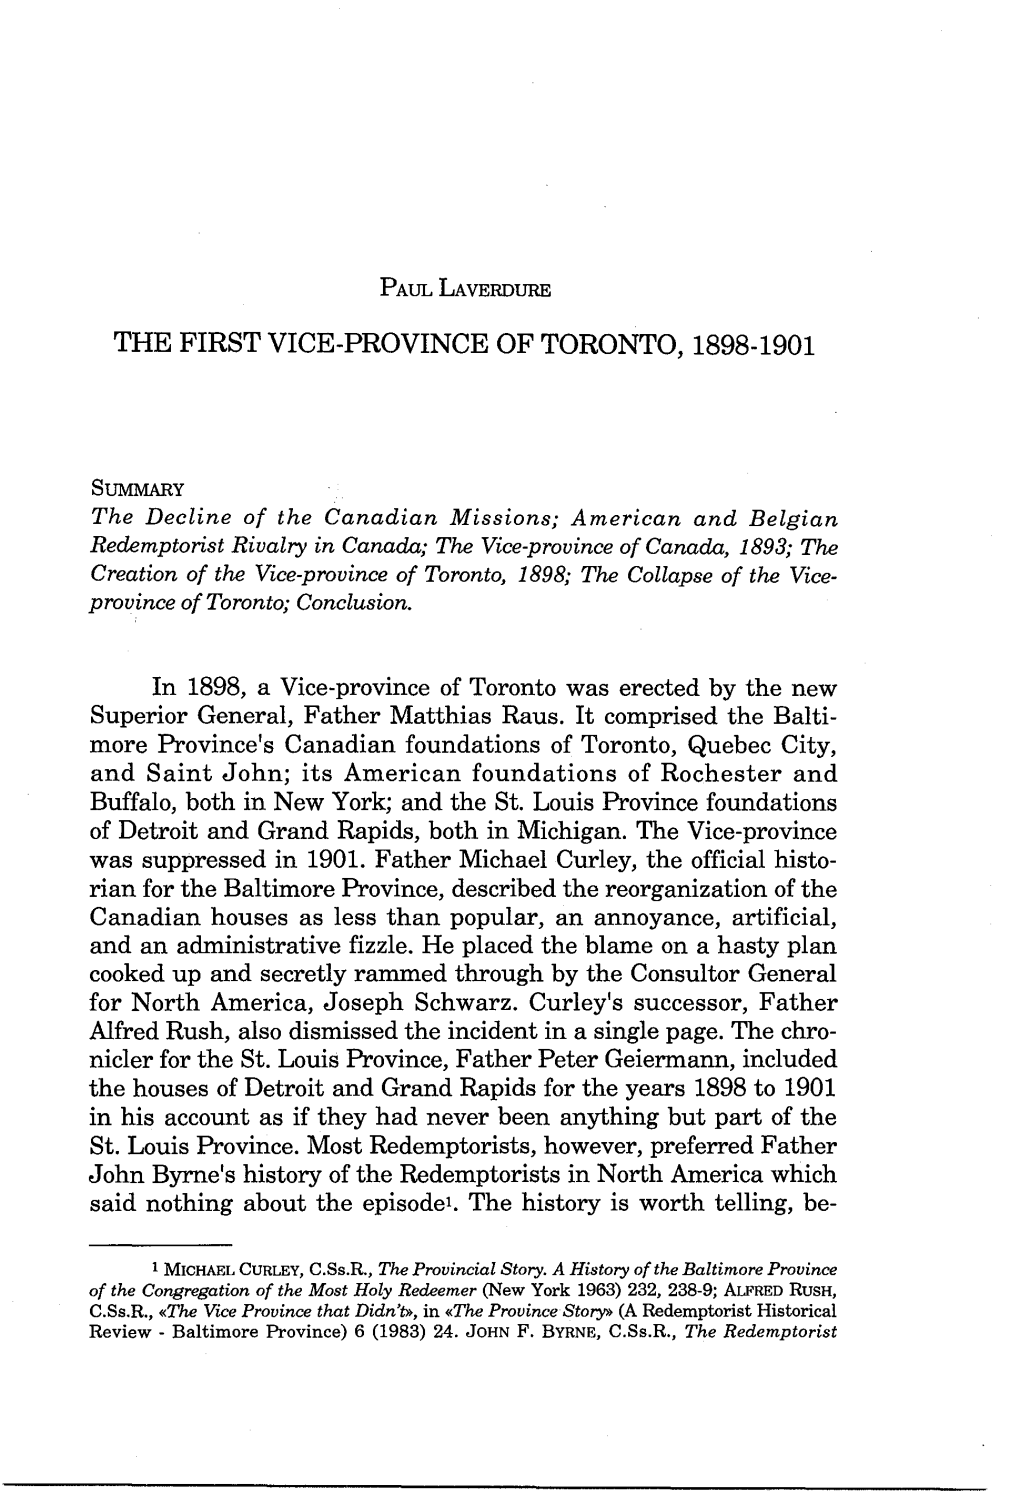 The First Vice-Province of Toronto, 1898-1901